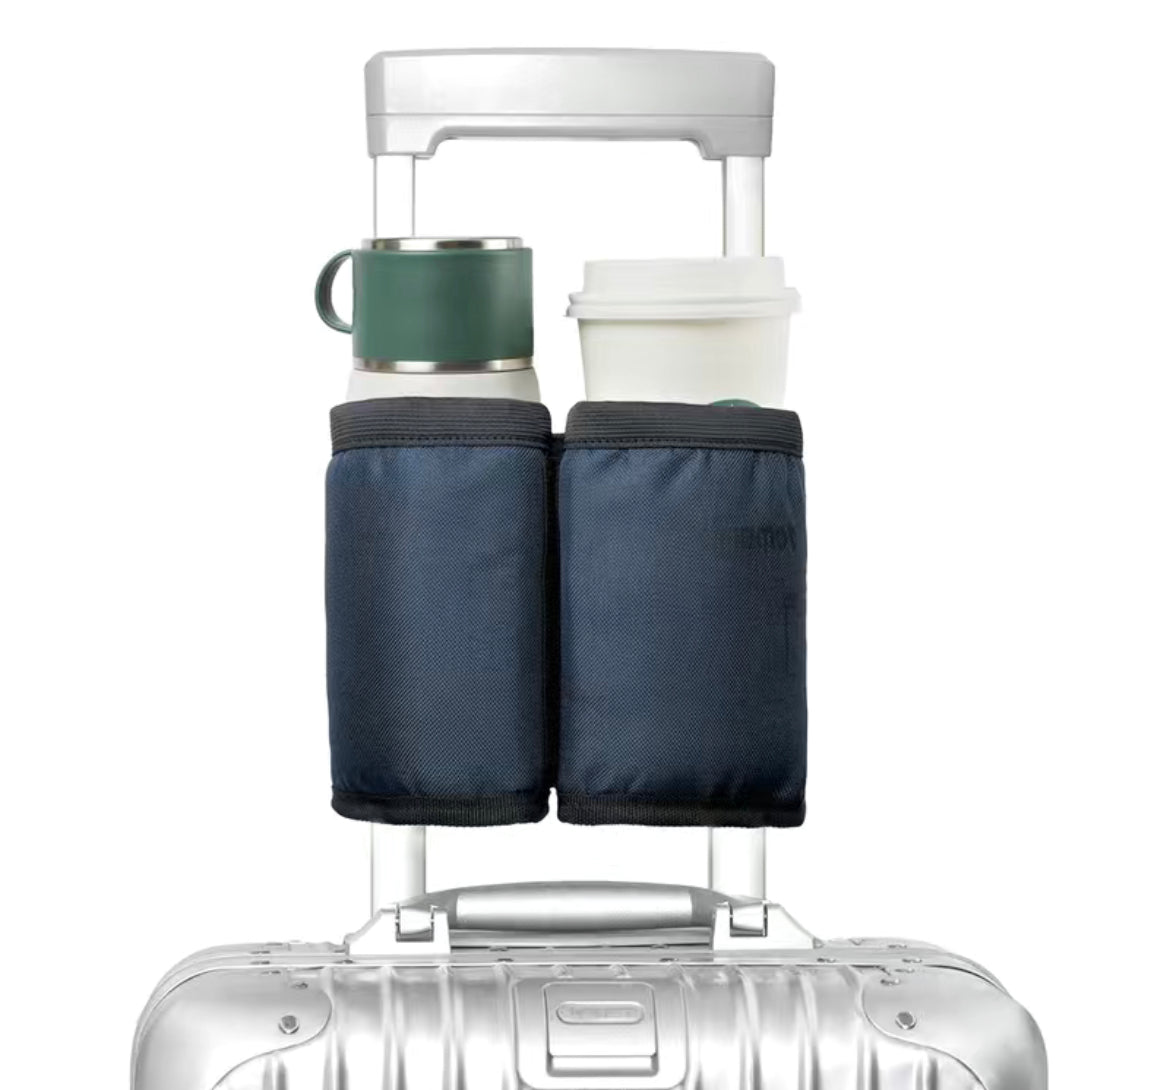 On Sale- Insulated Bottle Holder Caddy with Phone Pocket